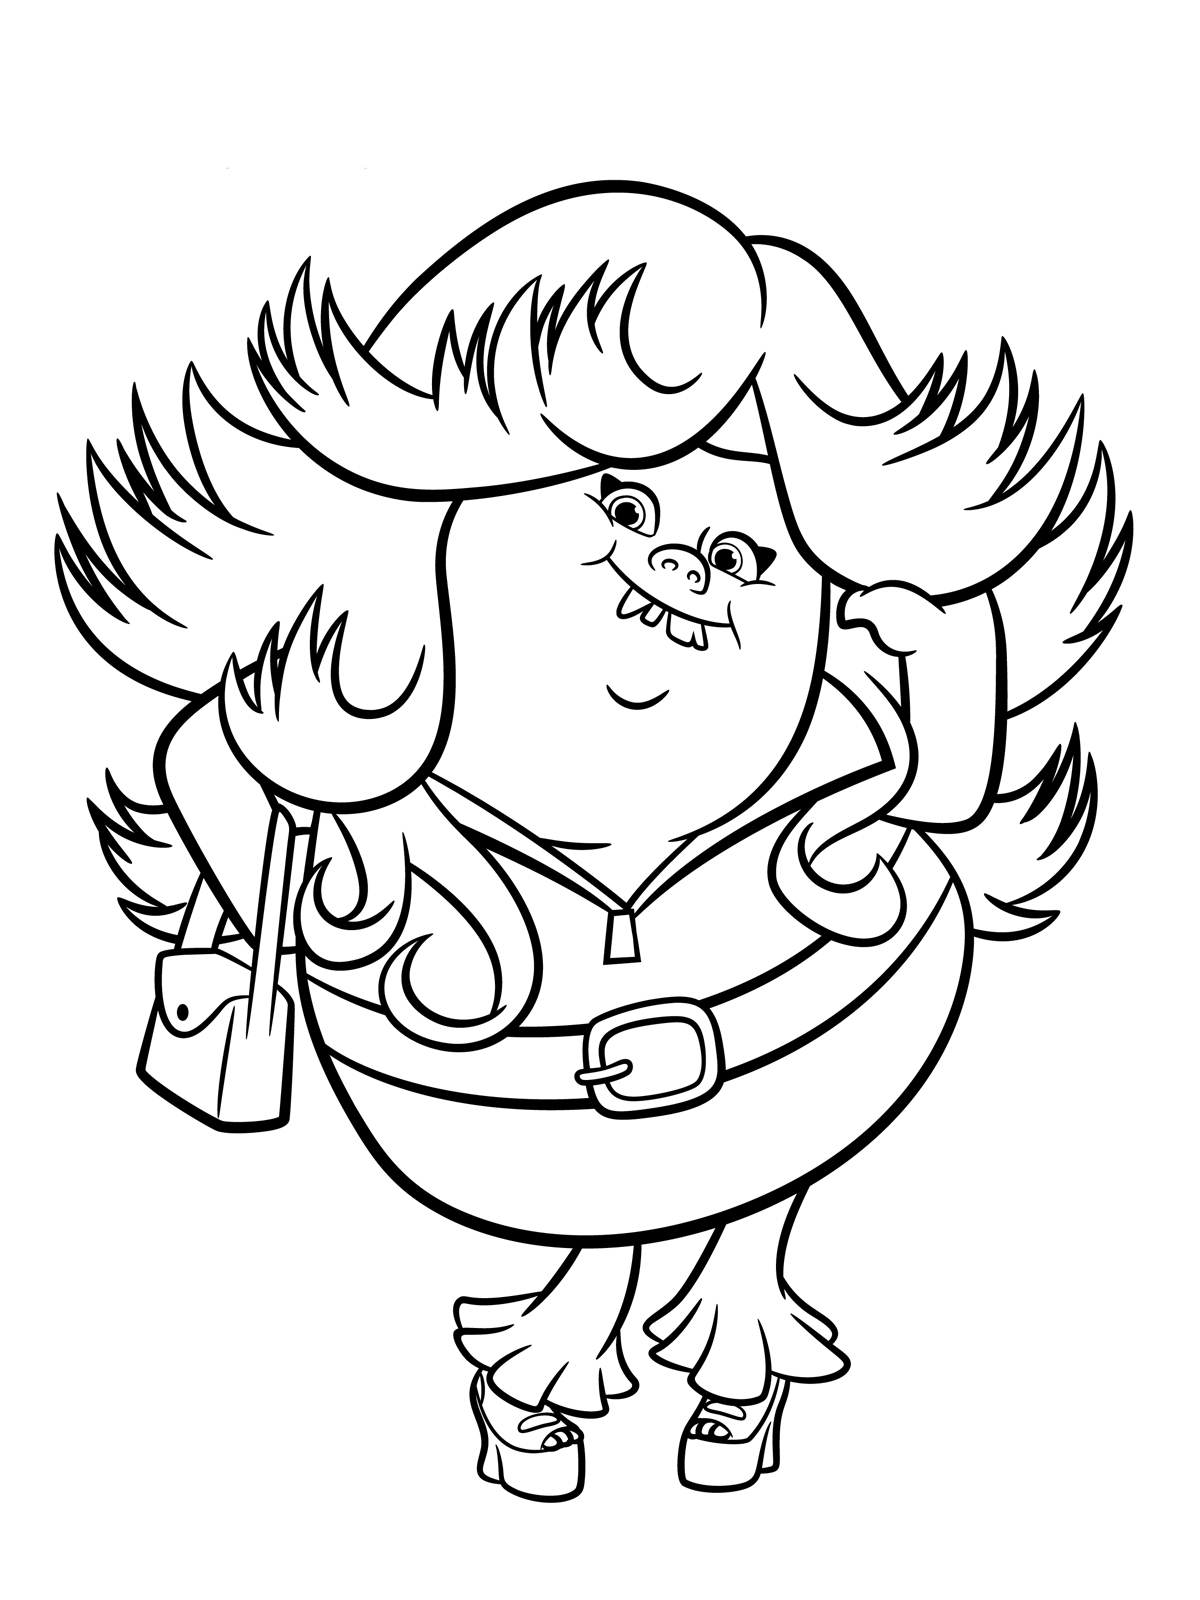 trolls-free-coloring-pages-at-getdrawings-free-download